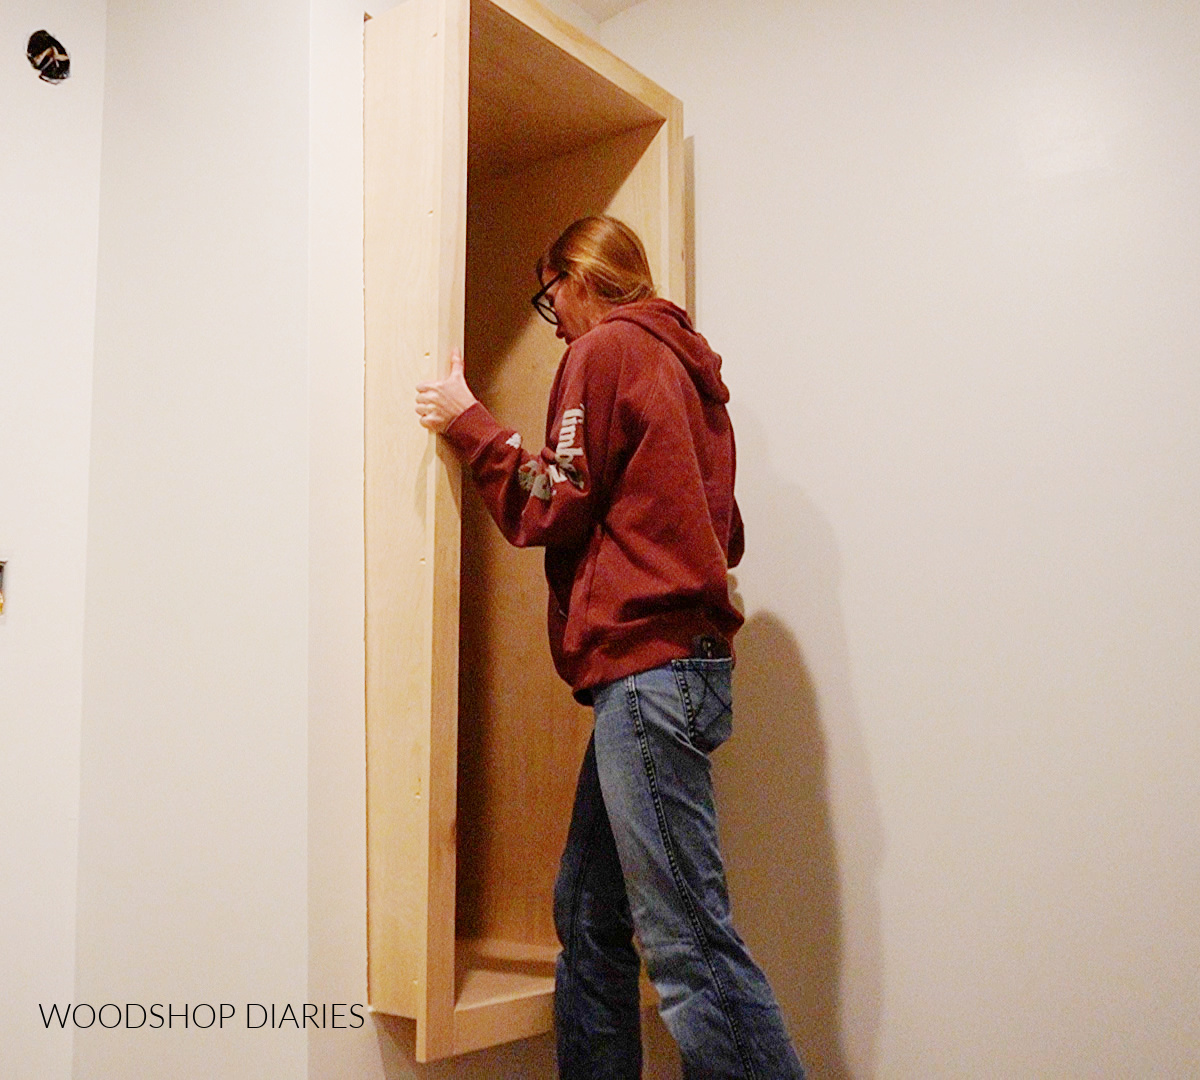 Shara Woodshop Diaries sliding built in cubby box into closet opening